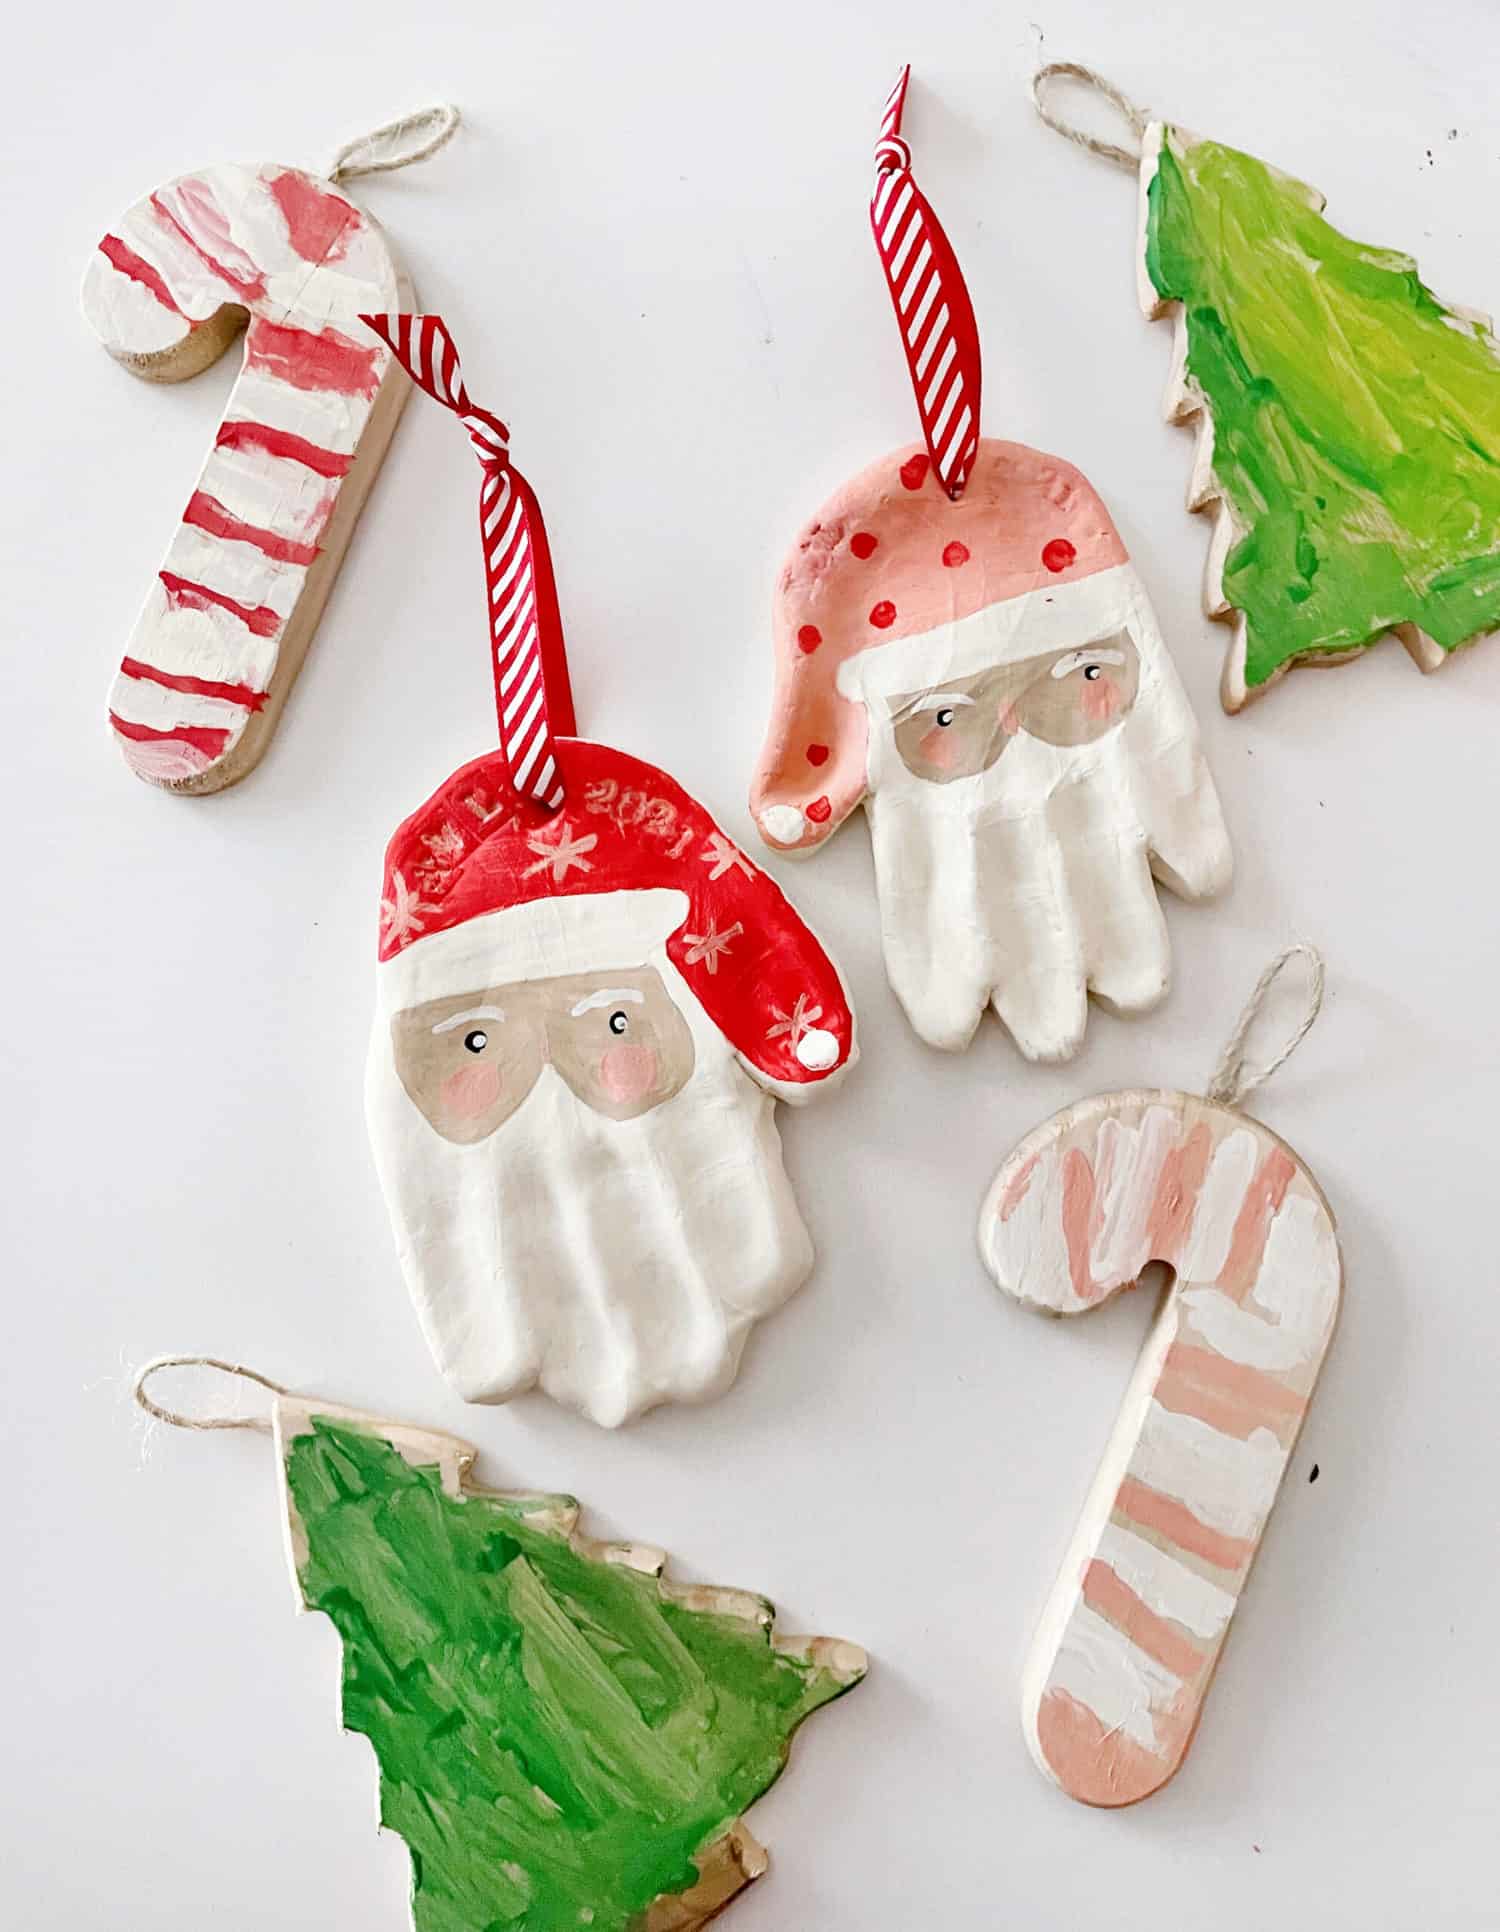 EASY DIY Christmas Ornaments for Kids They'll Love - DIY Candy